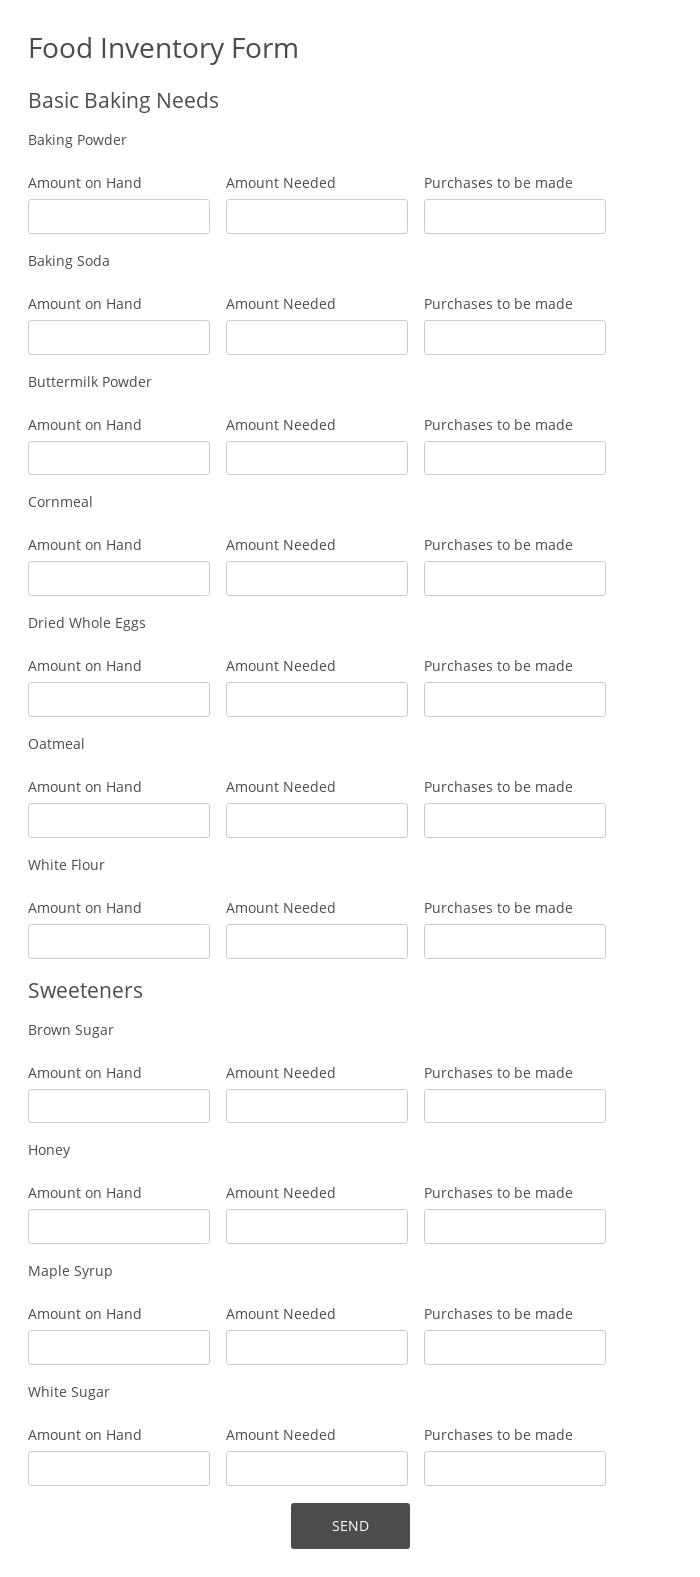 Food Inventory Form